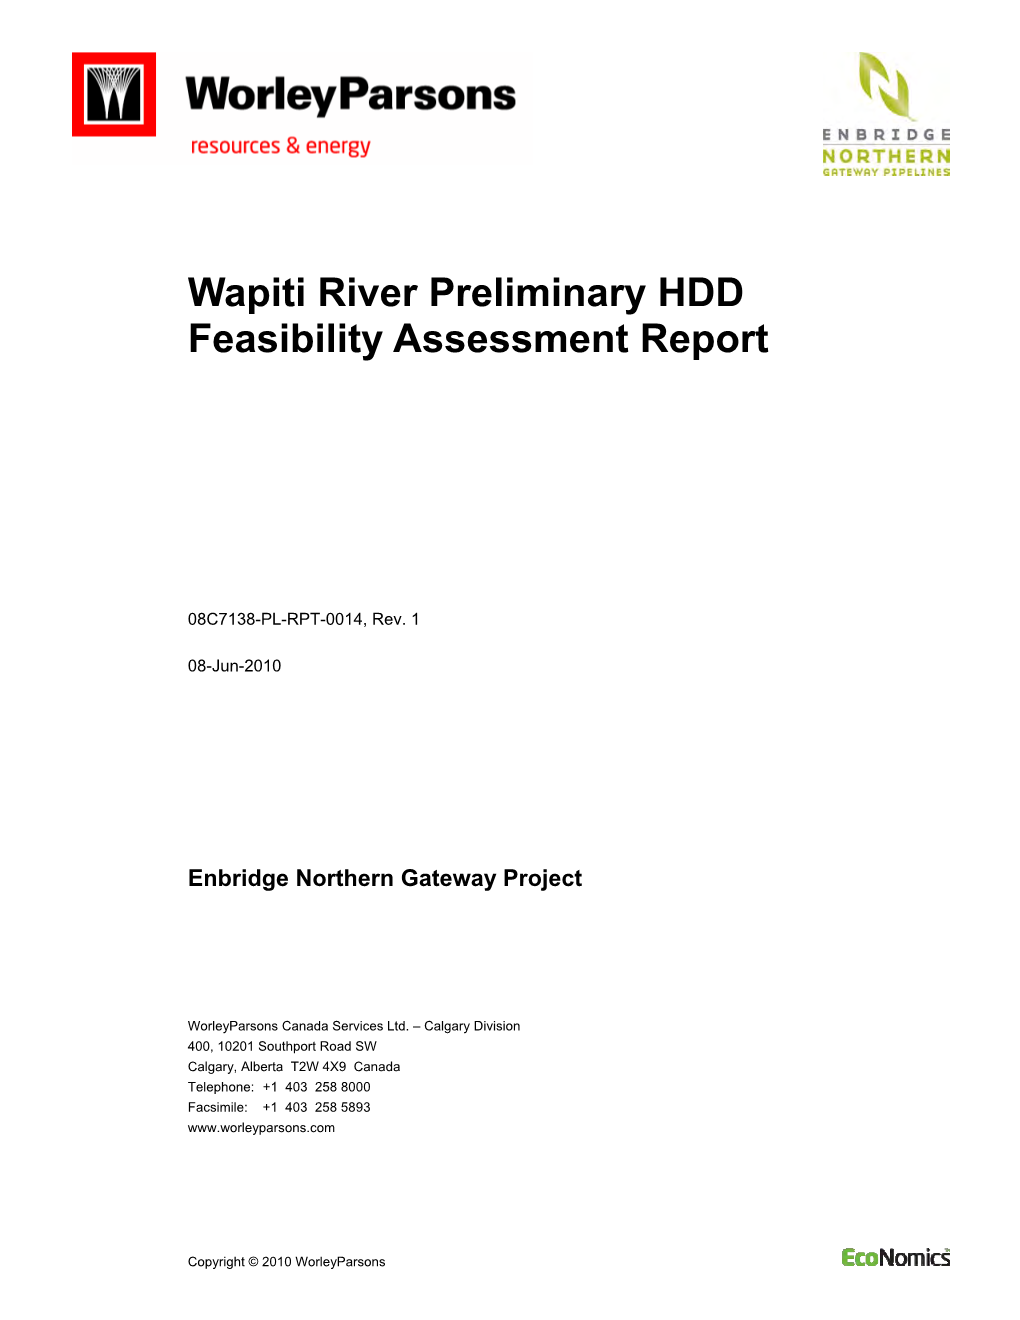 Wapiti River Preliminary HDD Feasibility Assessment Report